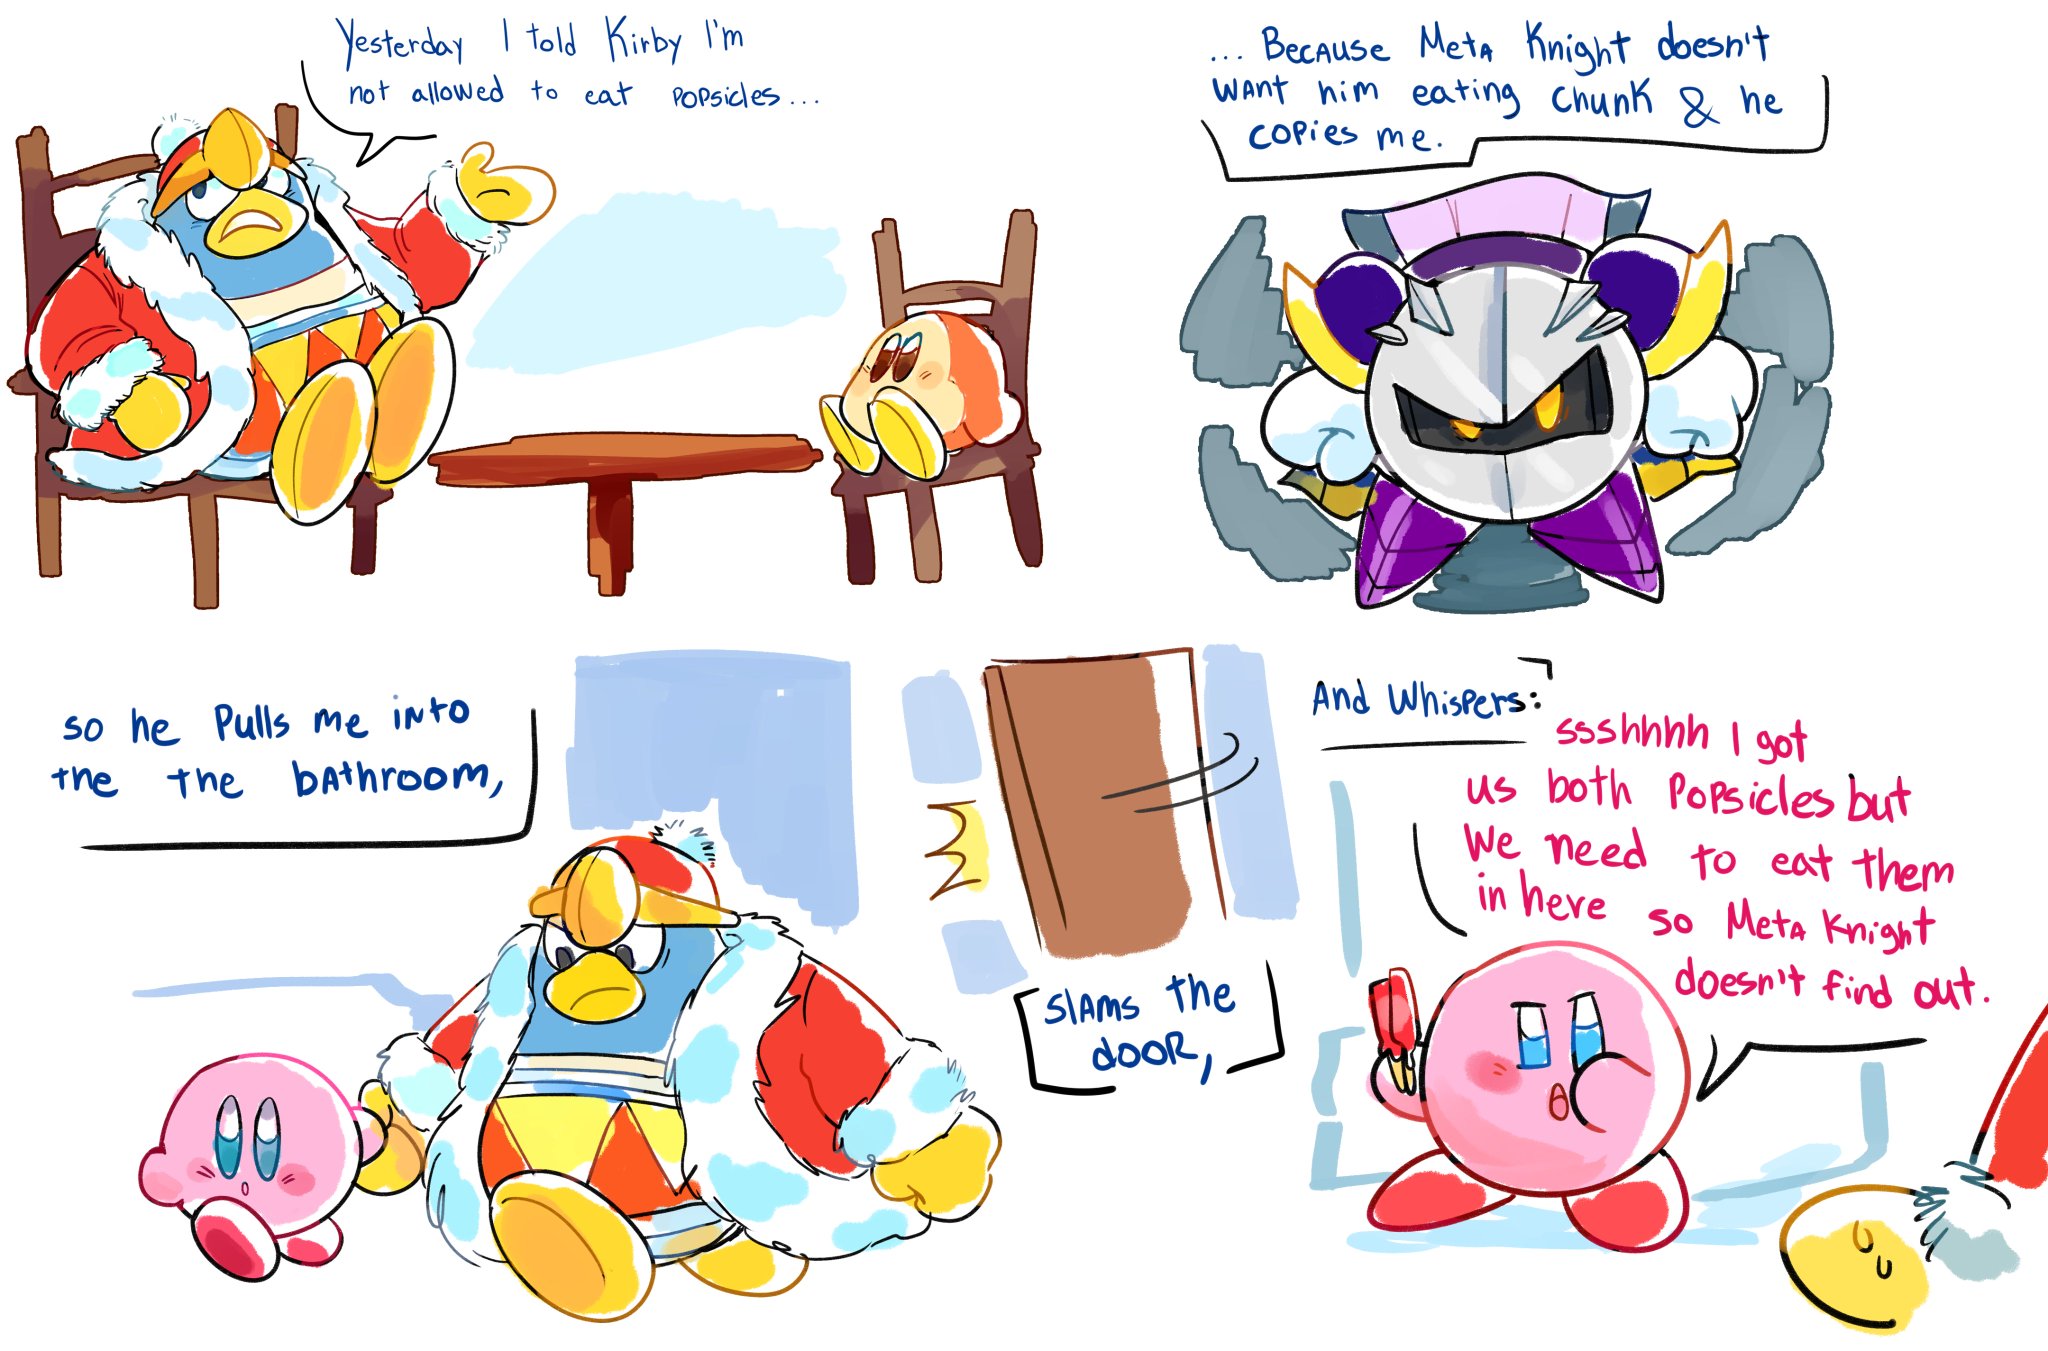 Lily S. on X: ⭐️ Kirby and Meta Knight 🗡 I did this to use as